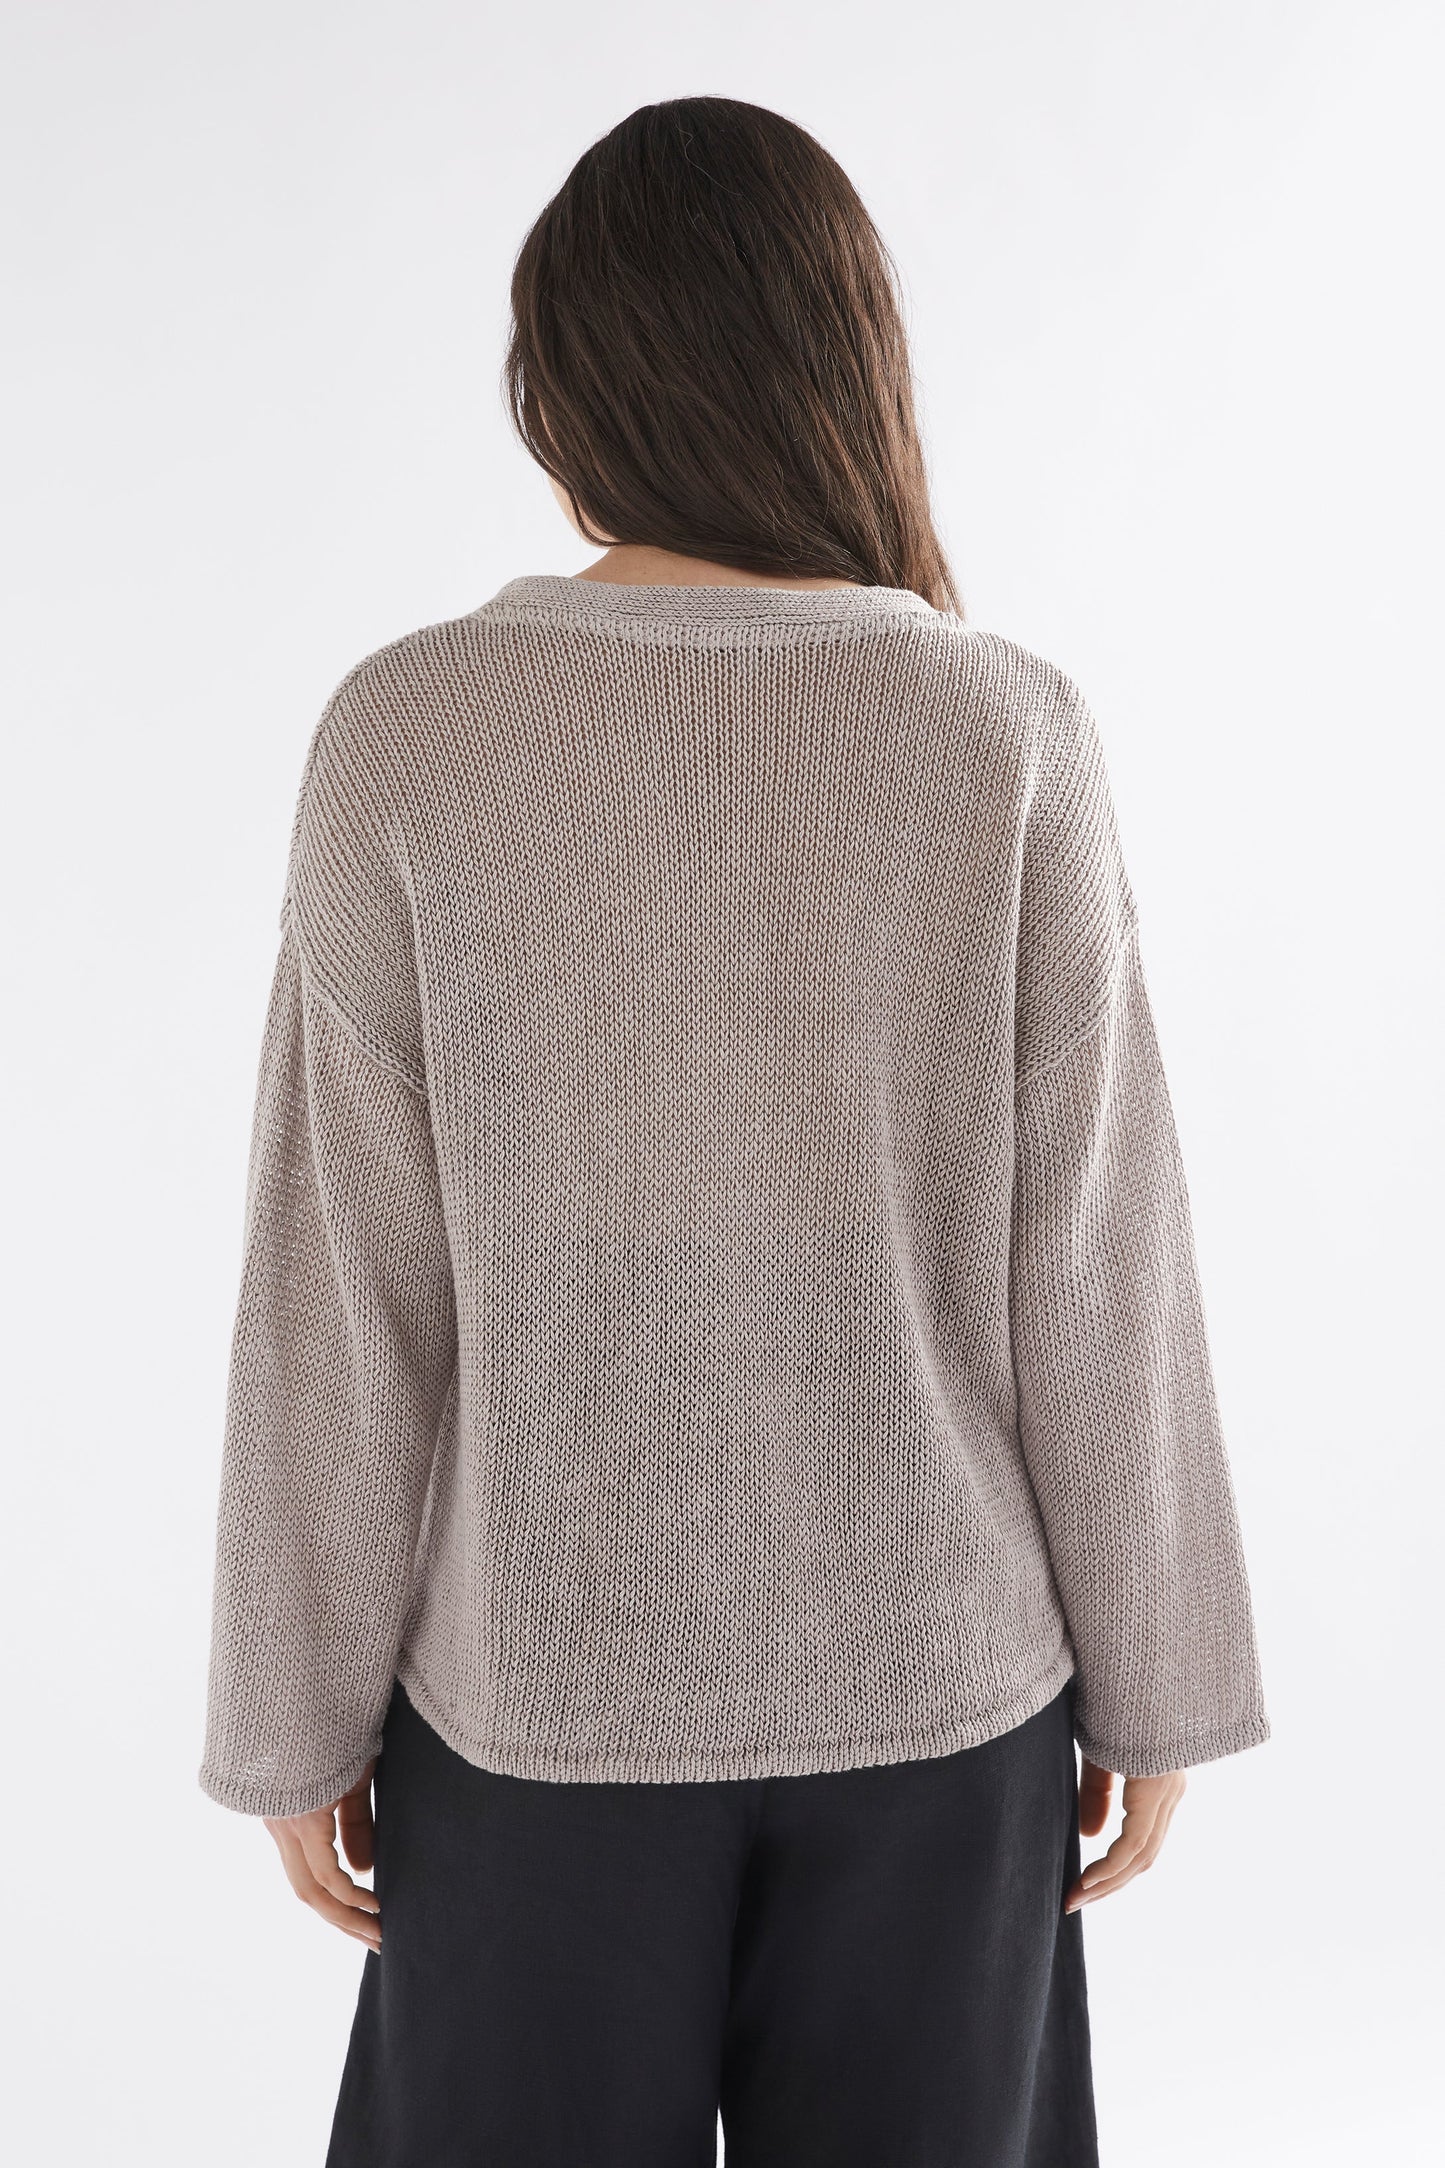 Elk The Label - Mica Sweater - Silver